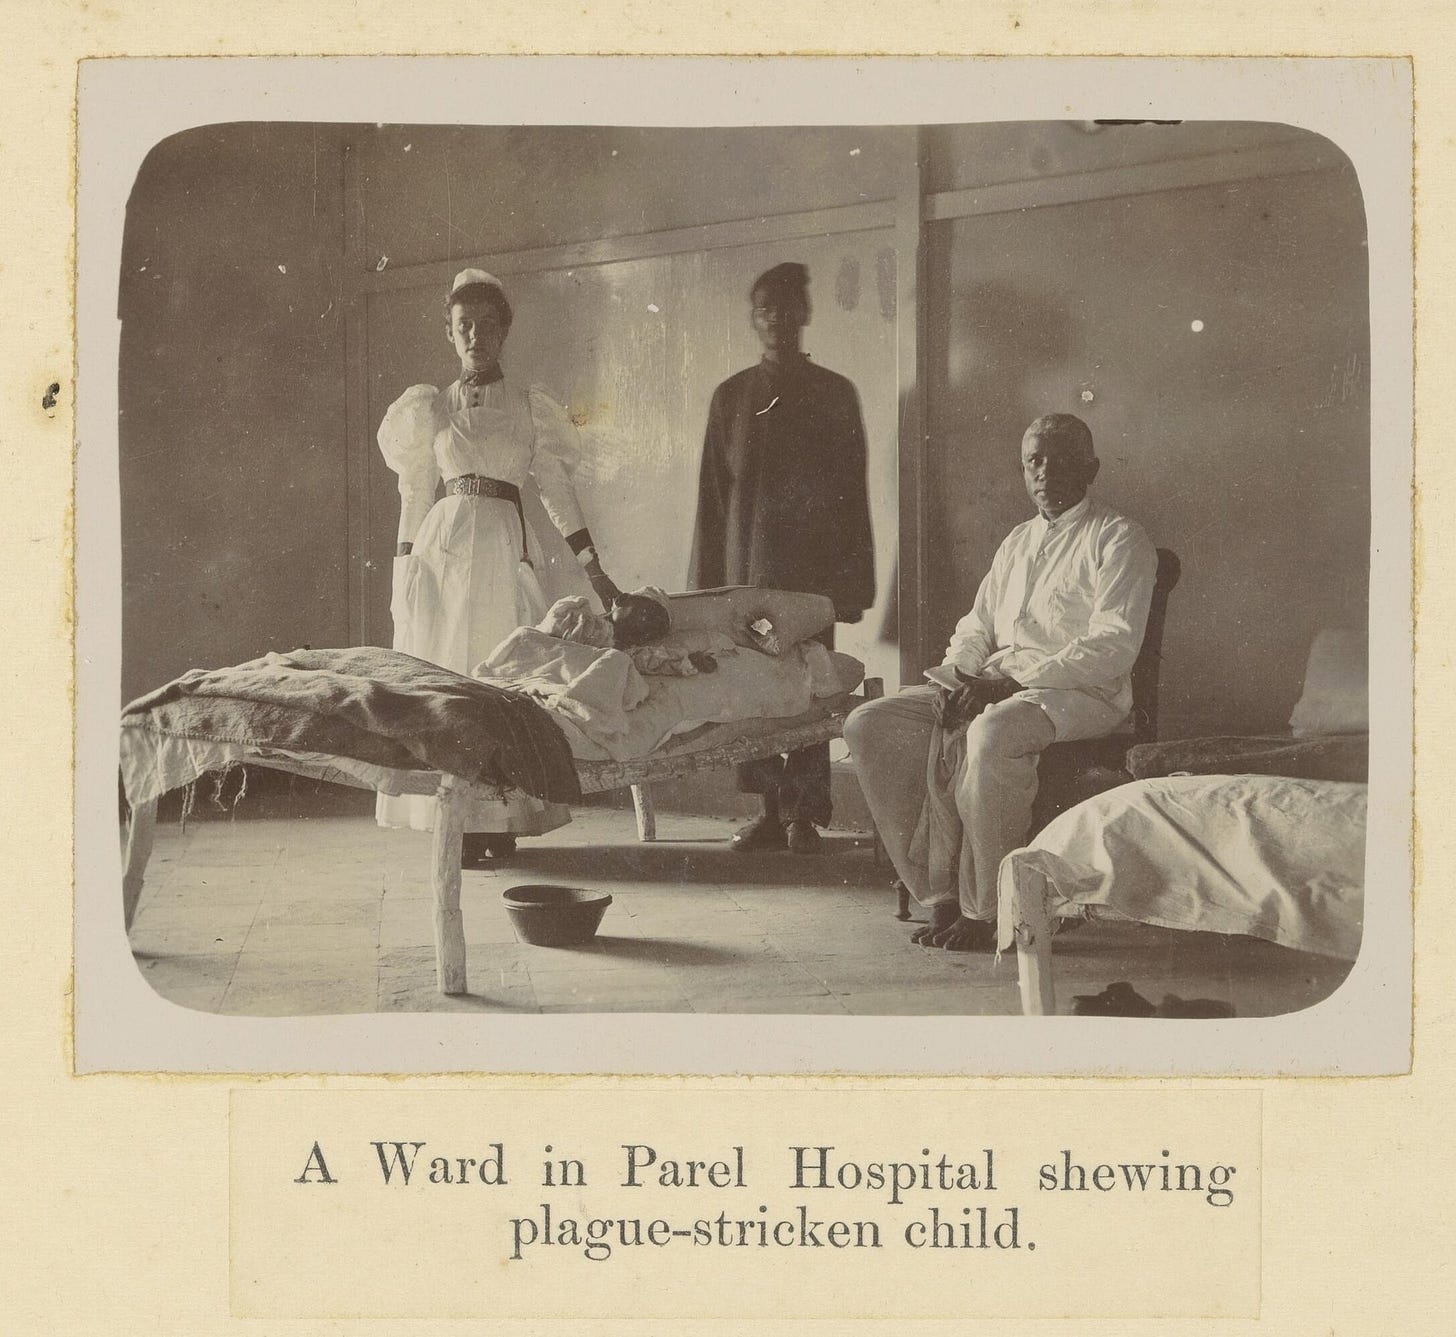 indianhistorypics on X: "1890s :: Bubonic Plague Stricken Child In Hospital  , Parel , Bombay In 1855 #Bubonic #Plague Originated In Yunnan , #China And  Spread Across The World Killing Millions https://t.co/c94ksSB7fr" / X